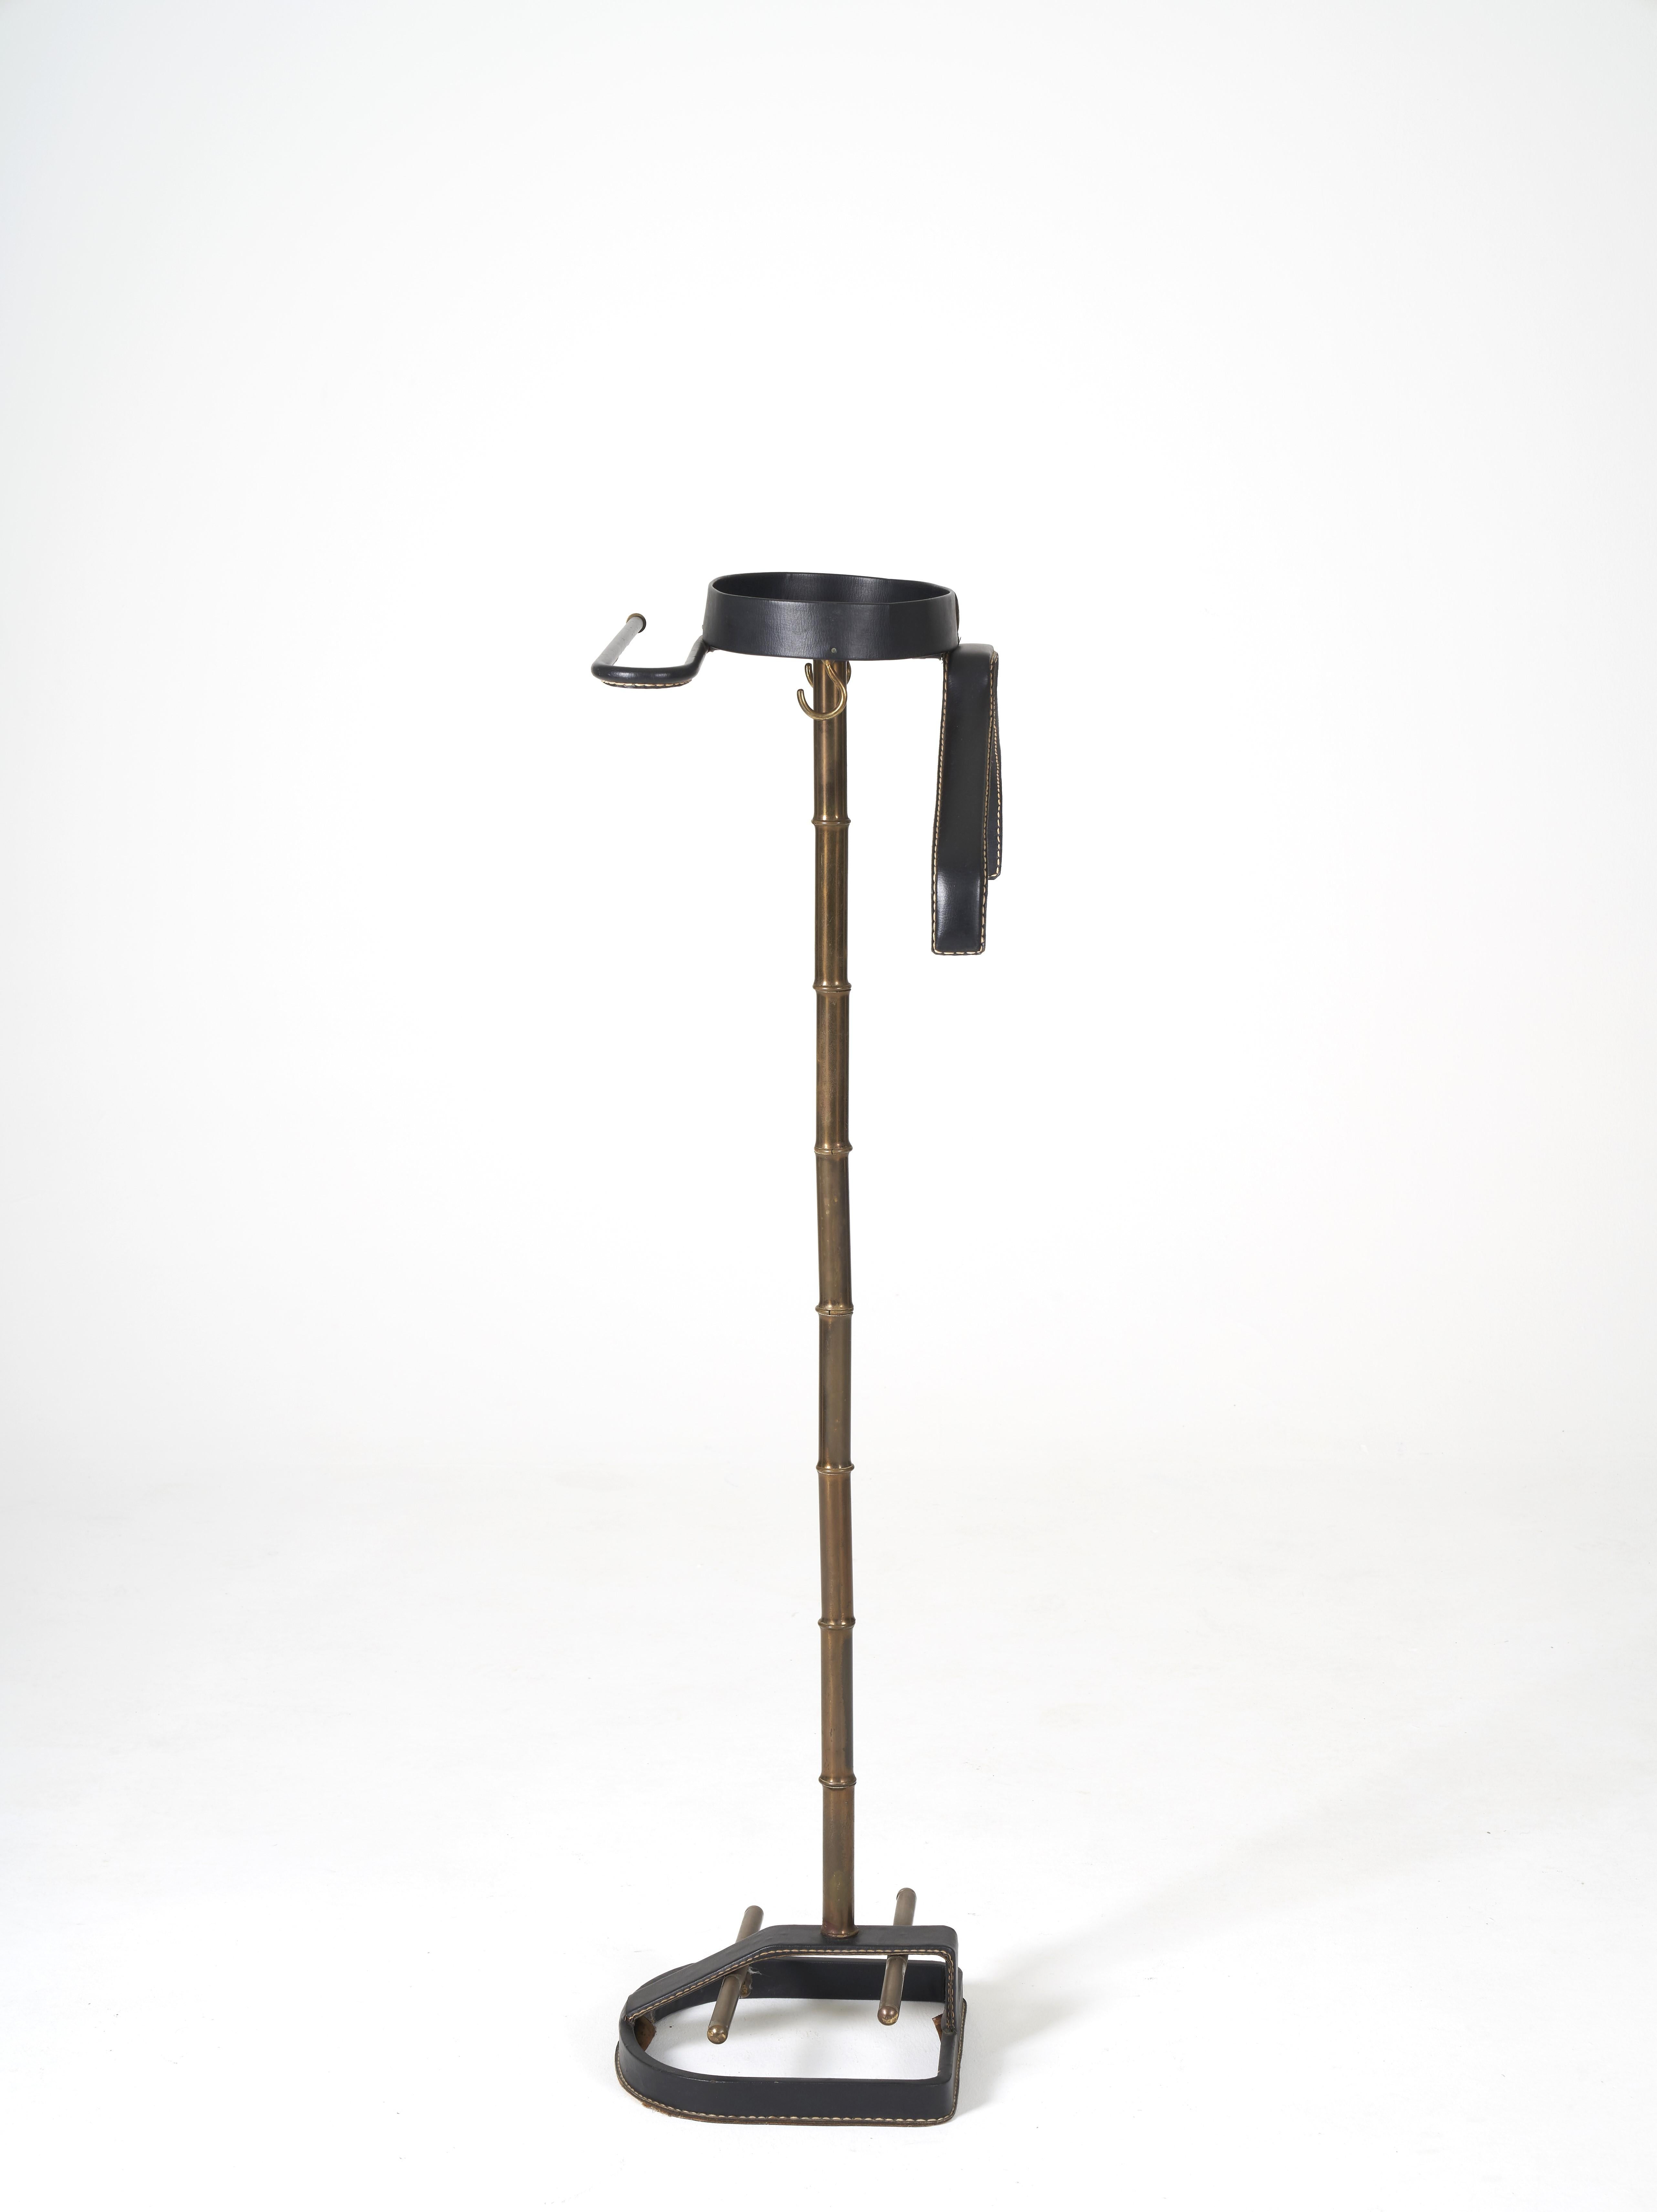 Nightstand Jacques ADNET for the Compagnie des Arts Français, 1950s. Base in gilded tubular metal imitating bamboo. Shelf, coat rack and trouser bar in sewn black leather. Shoe bar in brass. Good condition.